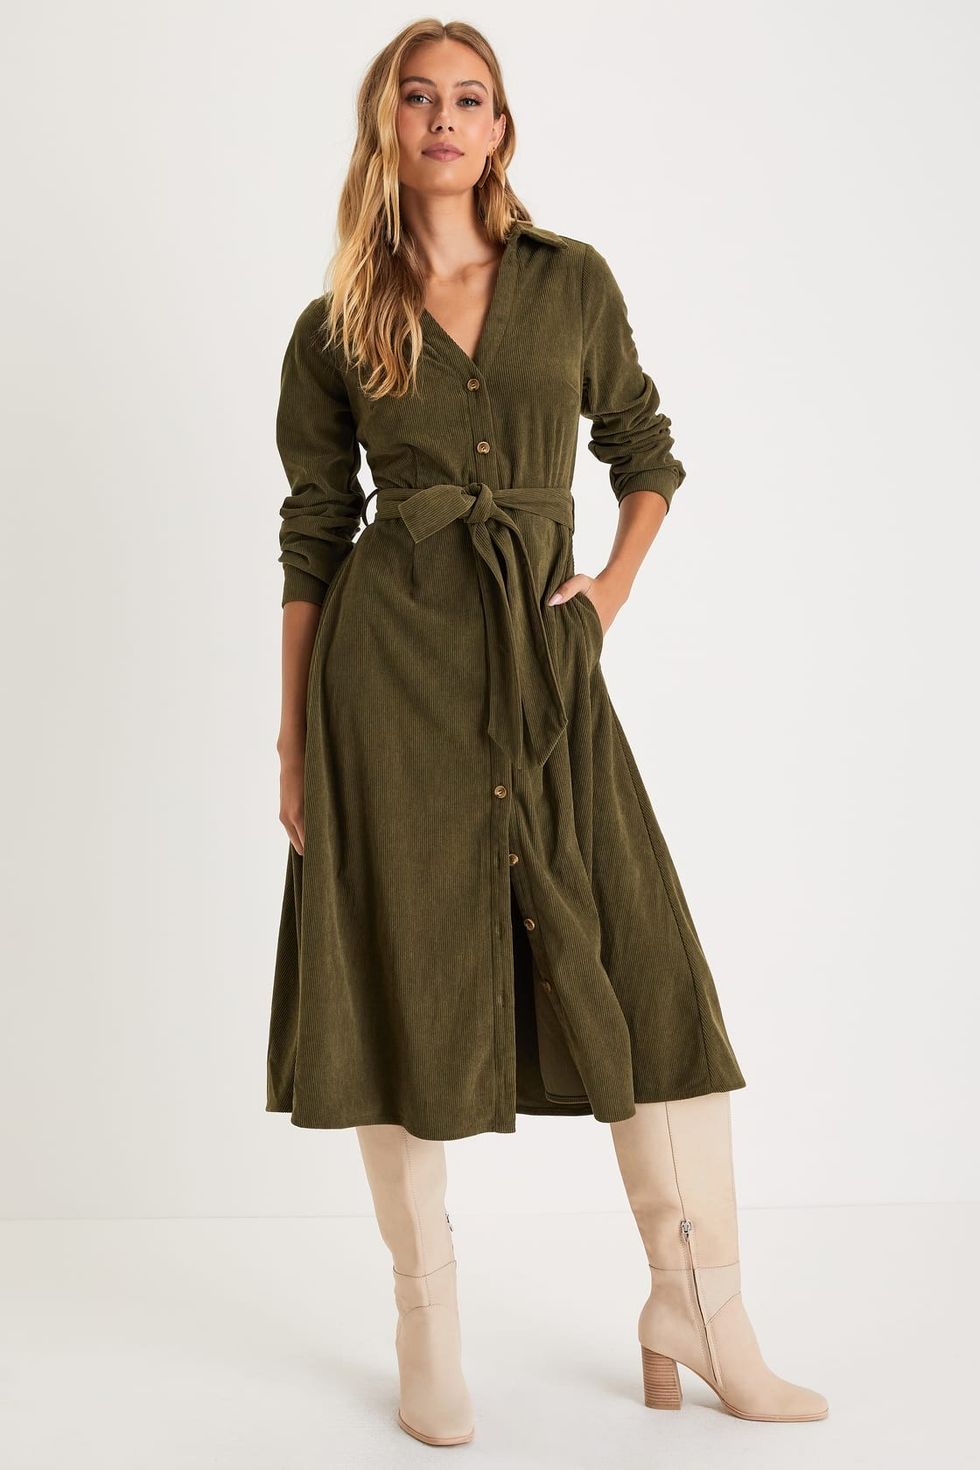 Casual Affection Olive Green Corduroy Midi Dress with Pockets